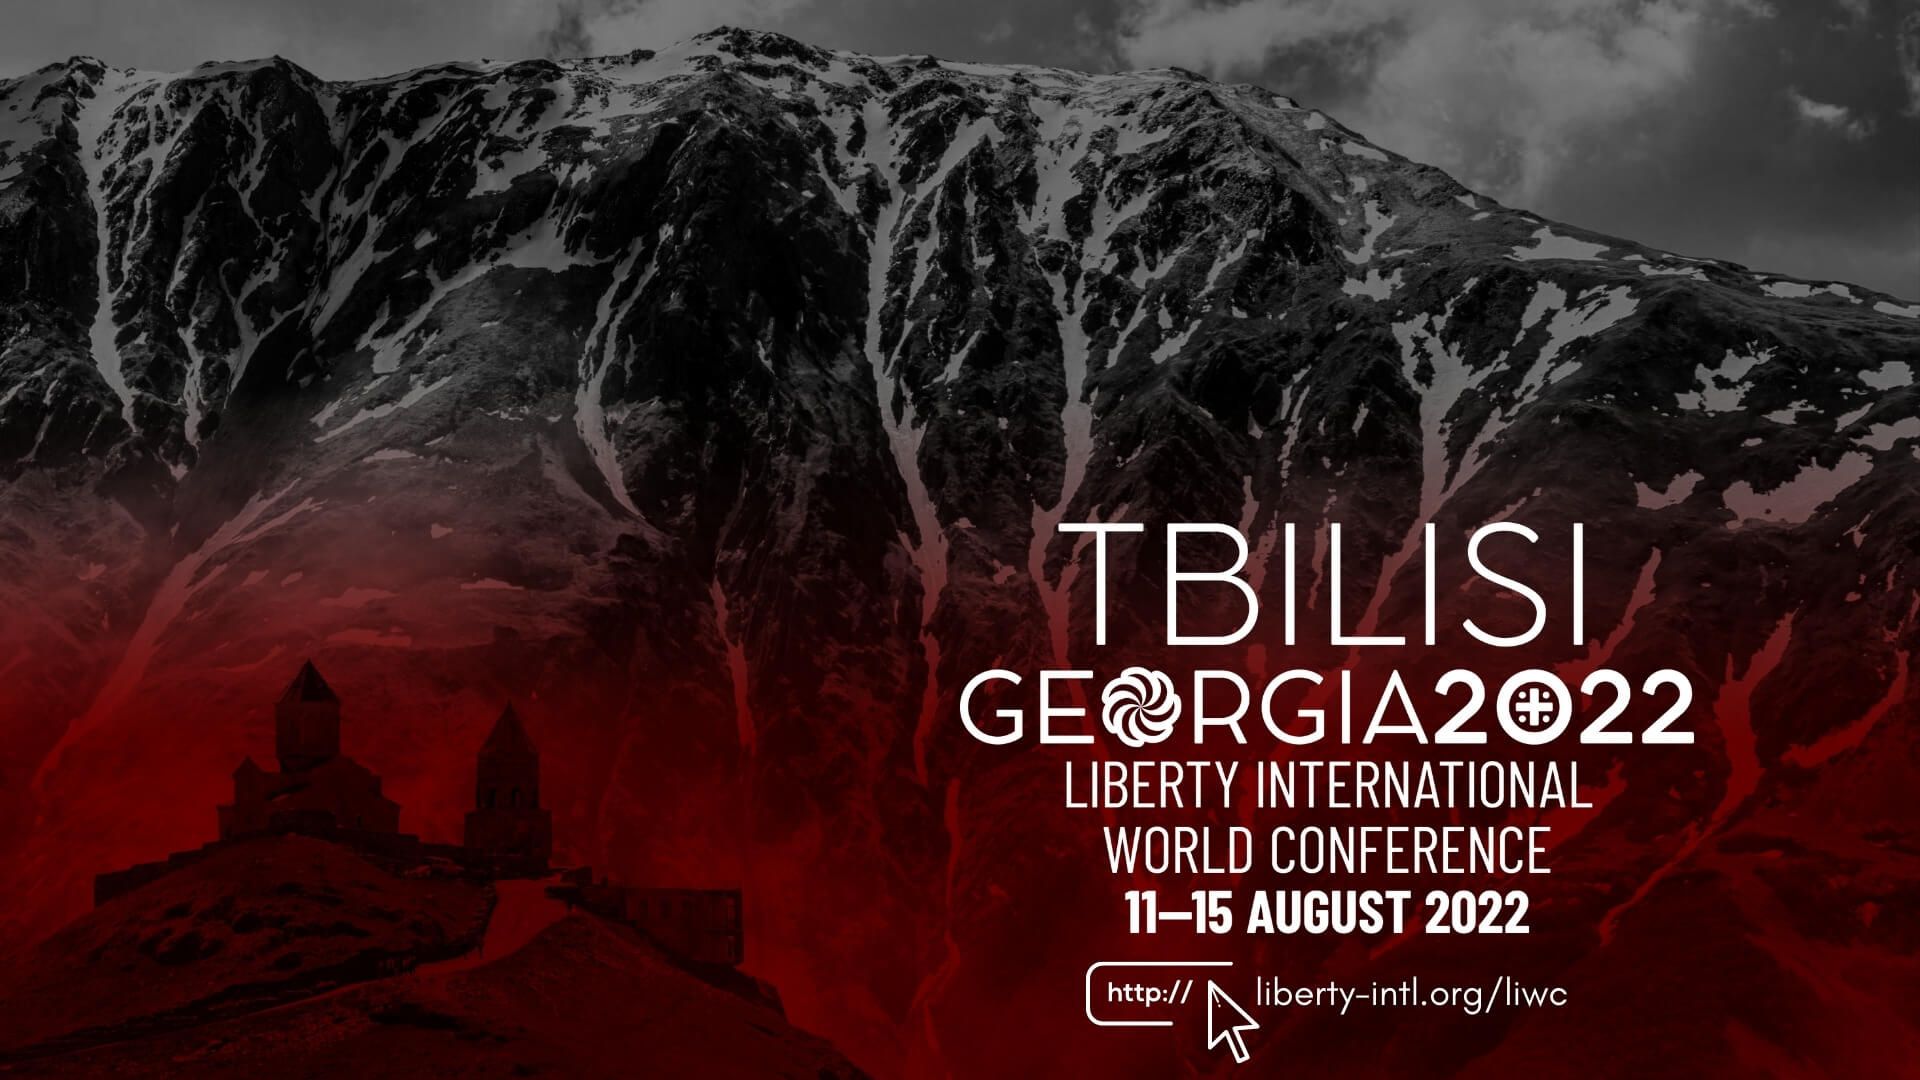 Liberty International World Conference Tbilisi 2022 agenda is here!